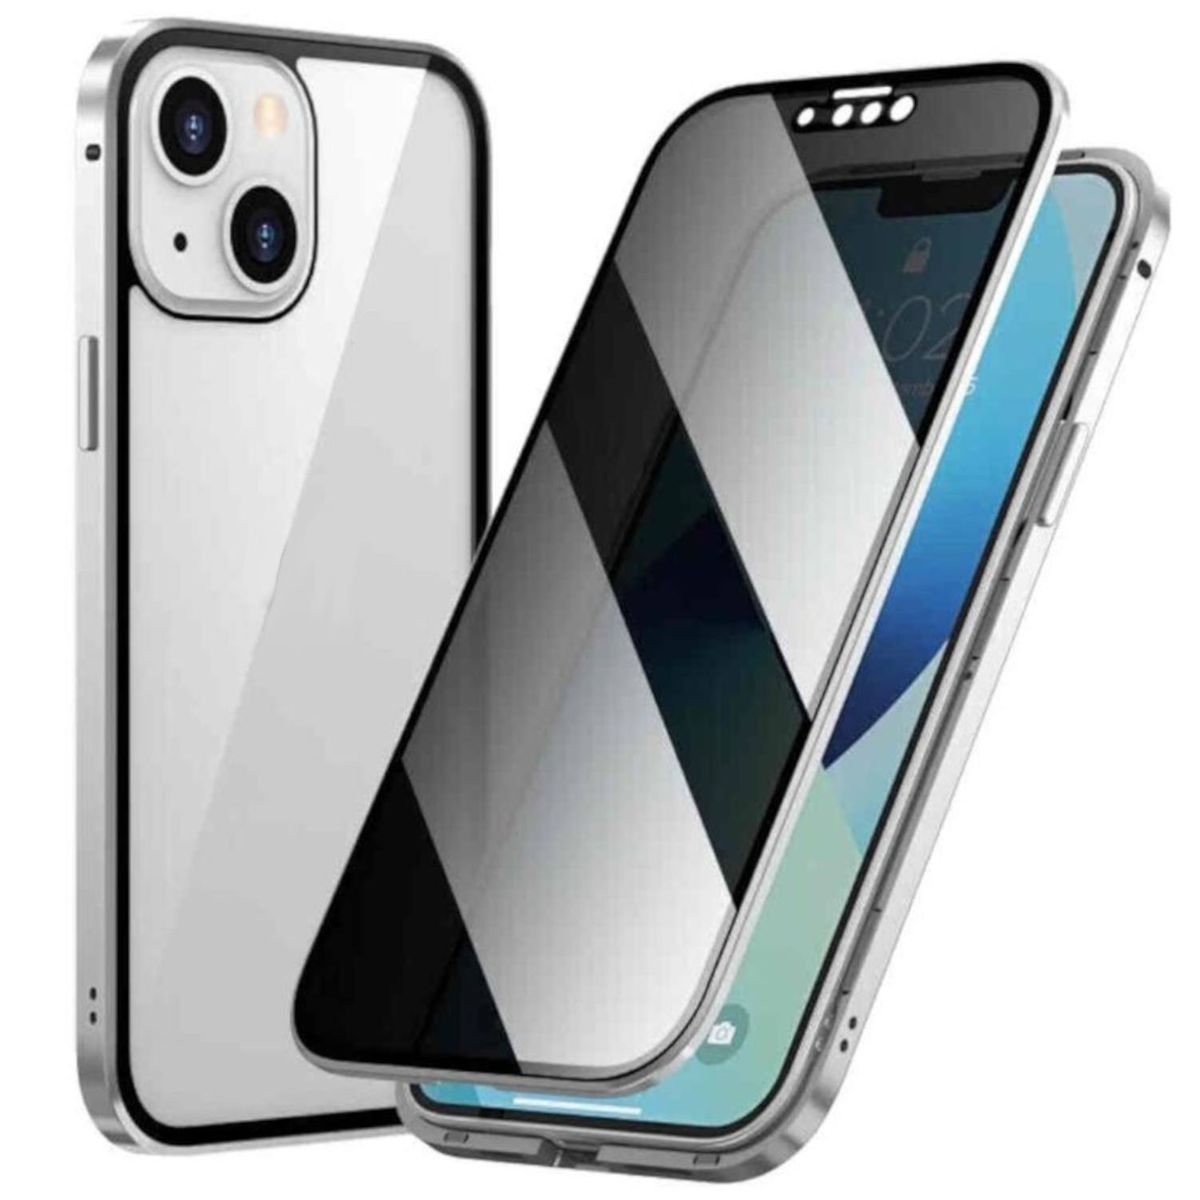 Glas Privacy Apple, Max, 360 Mirror Cover, WIGENTO Beidseitiger Hülle, Pro / Full Silber 15 / Magnet iPhone Transparent Grad